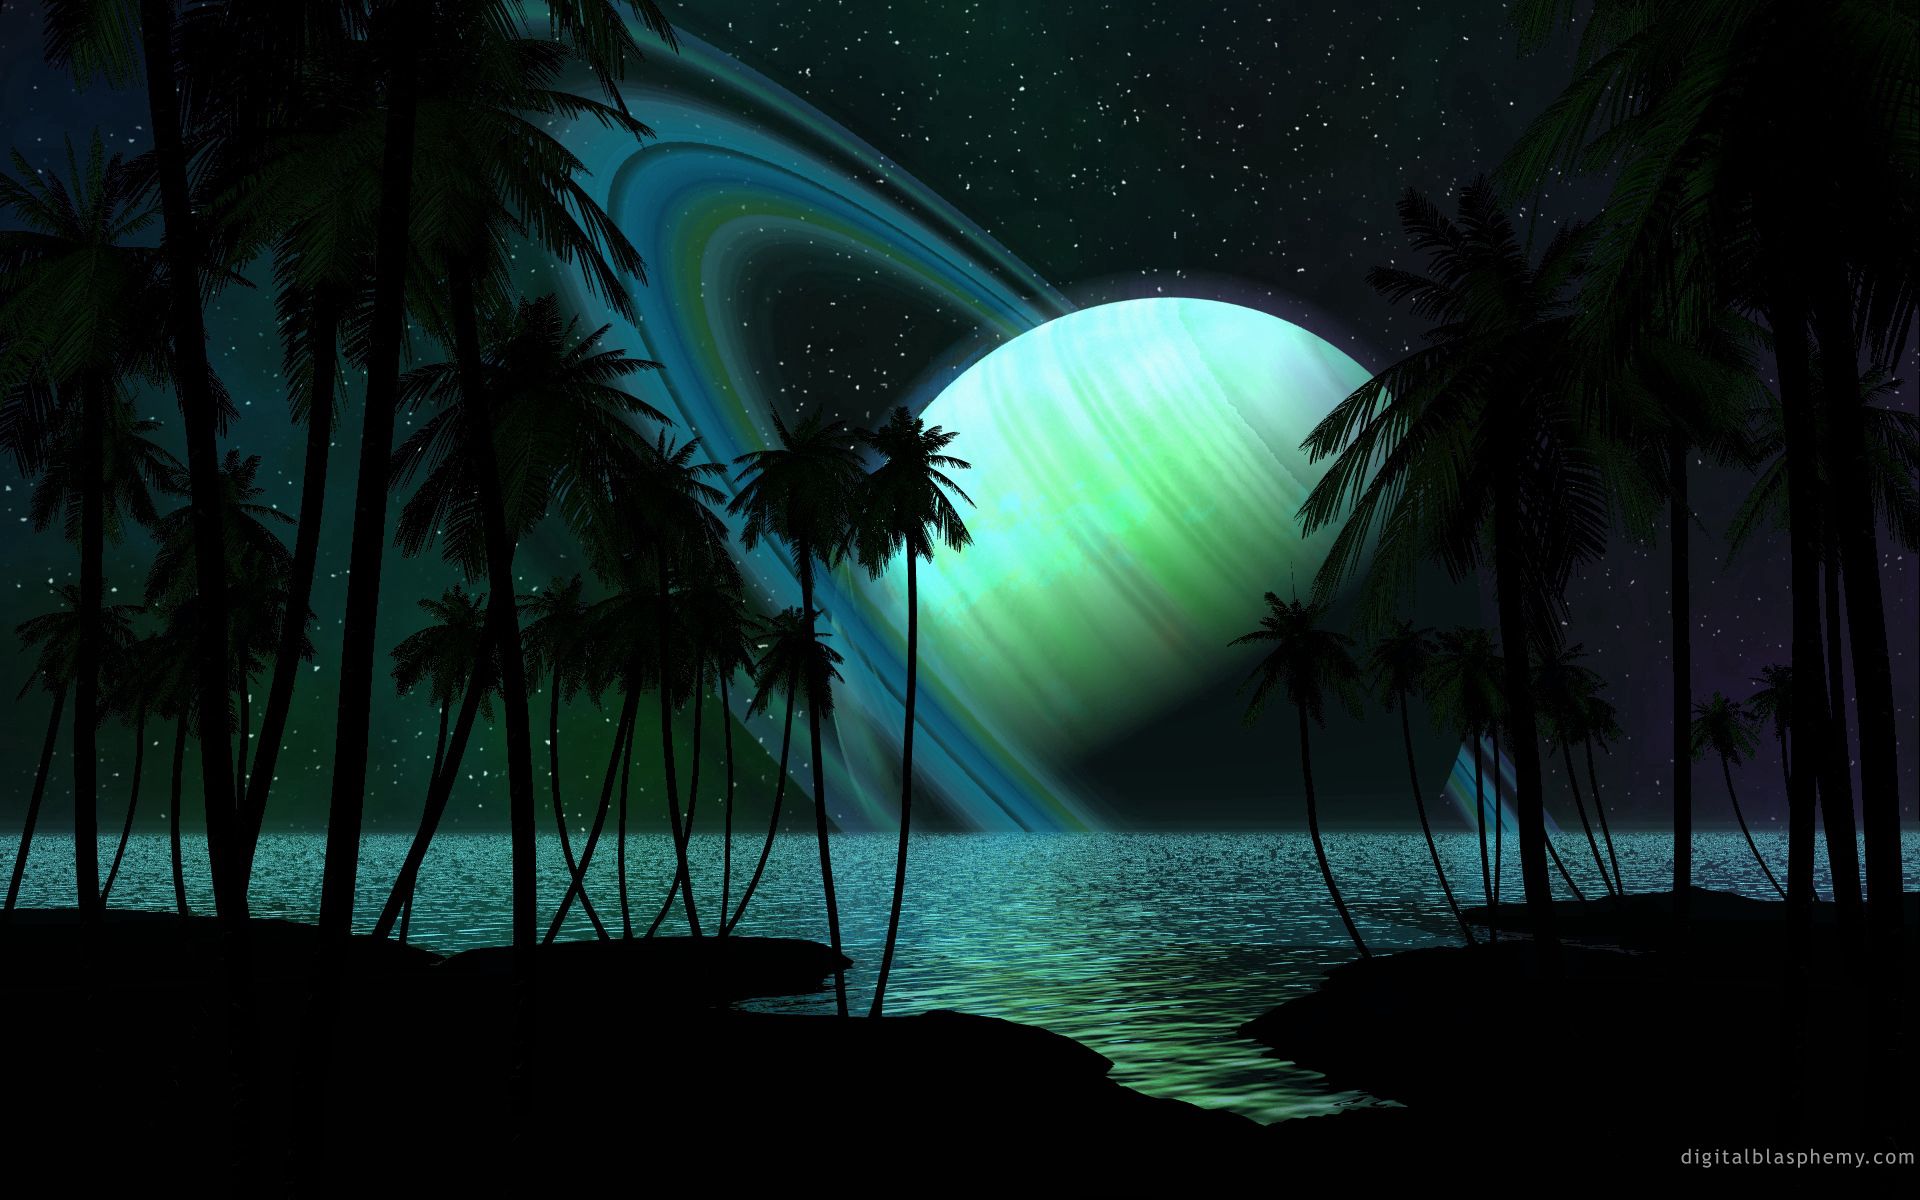 universe, saturn, water, palms, darkness, fiction, that's incredible wallpaper for mobile